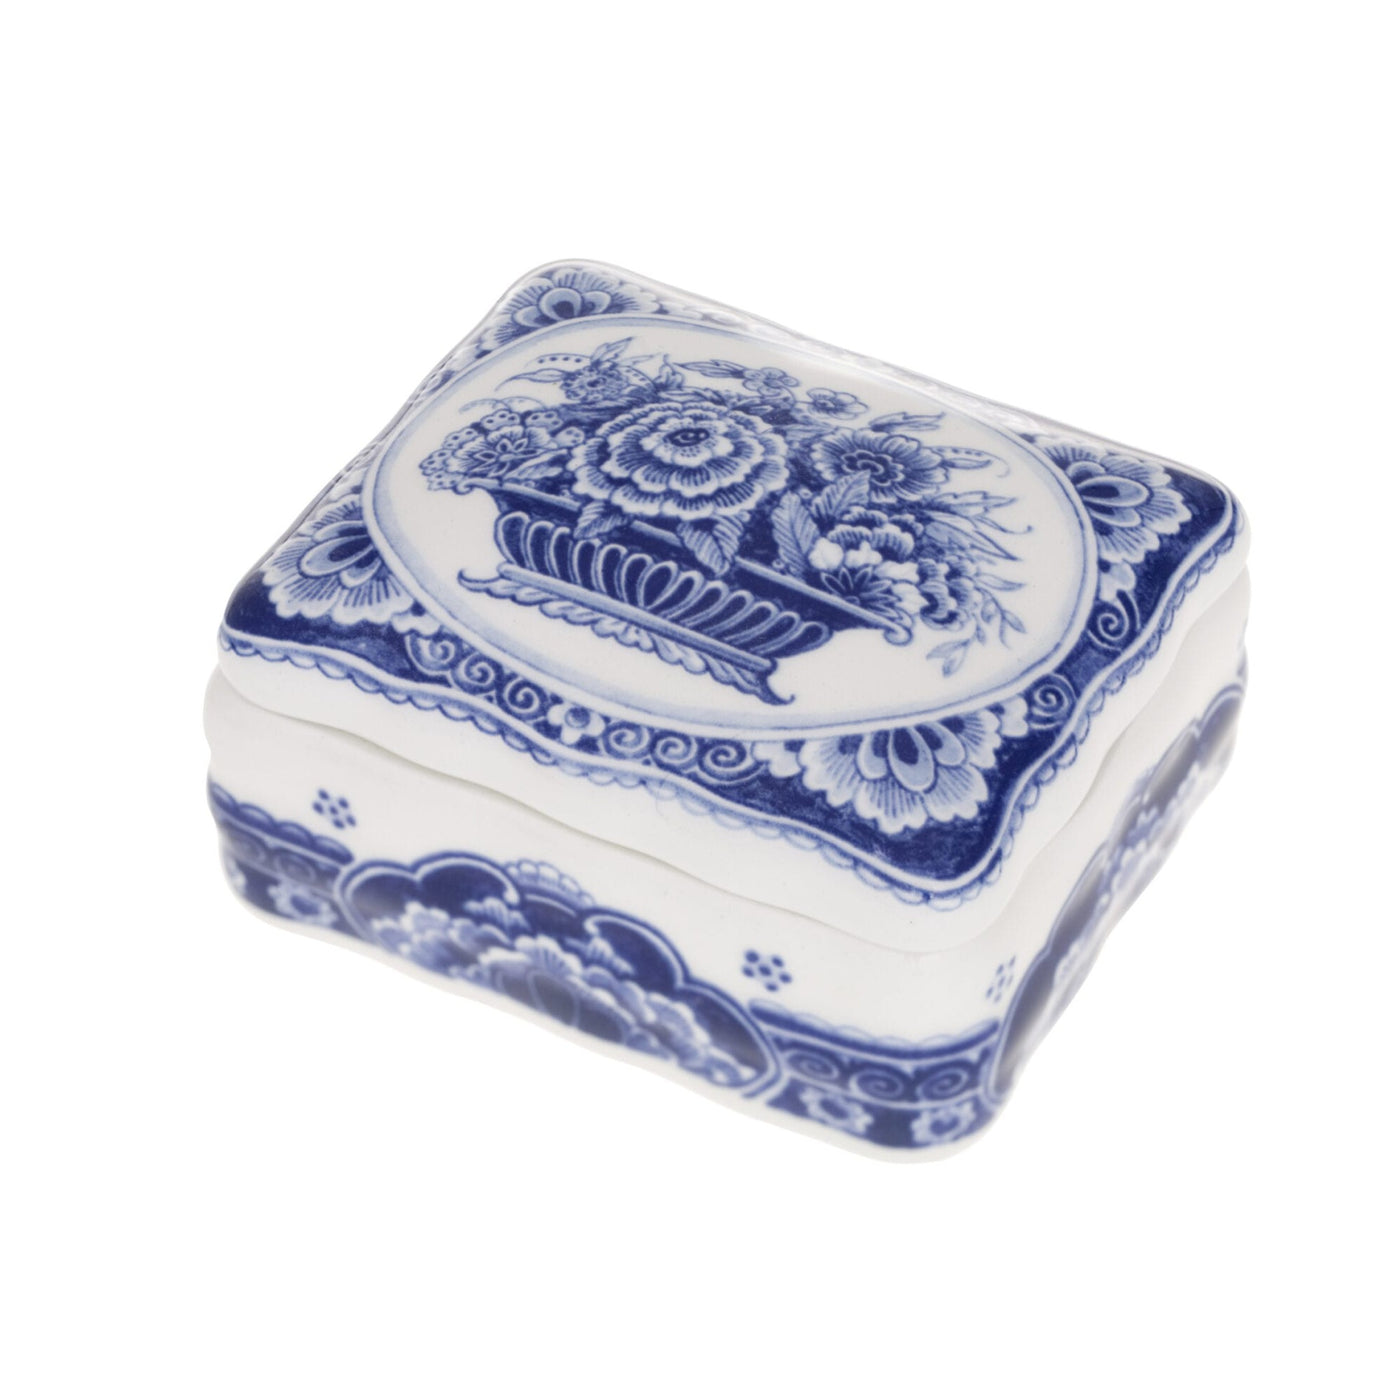 Flowers Table Box Delft Blue by Royal Delft